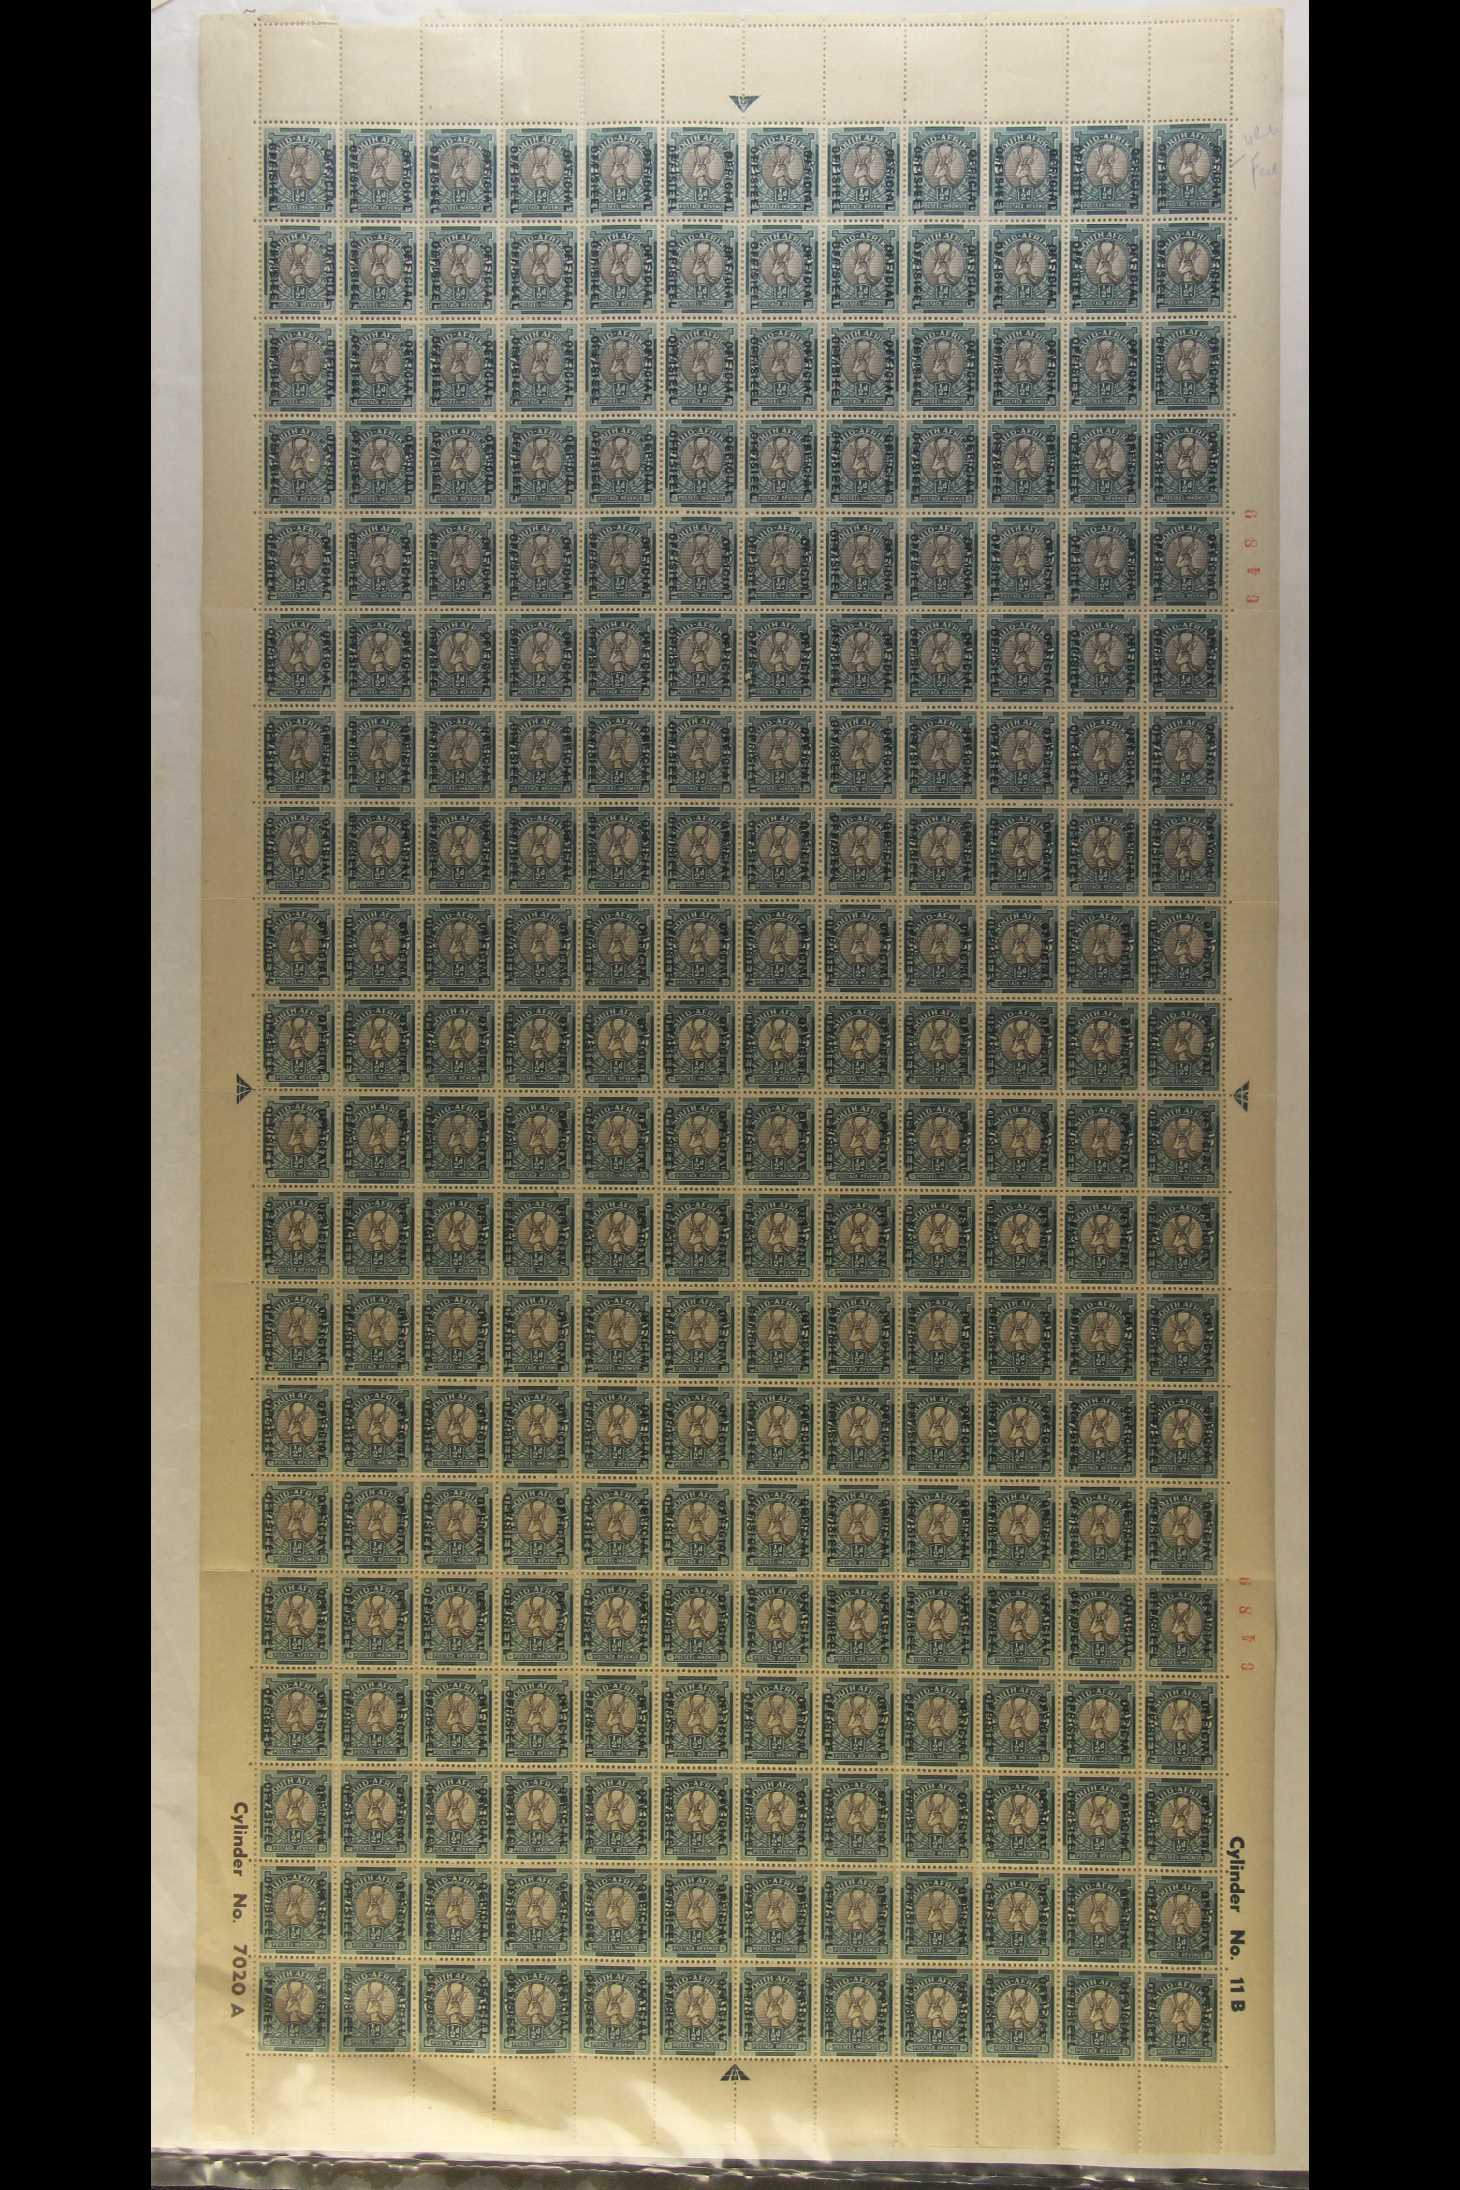 SOUTH AFRICA OFFICIALS 1949-50 ½d grey & green with entire design screened, complete sheet of 240 (